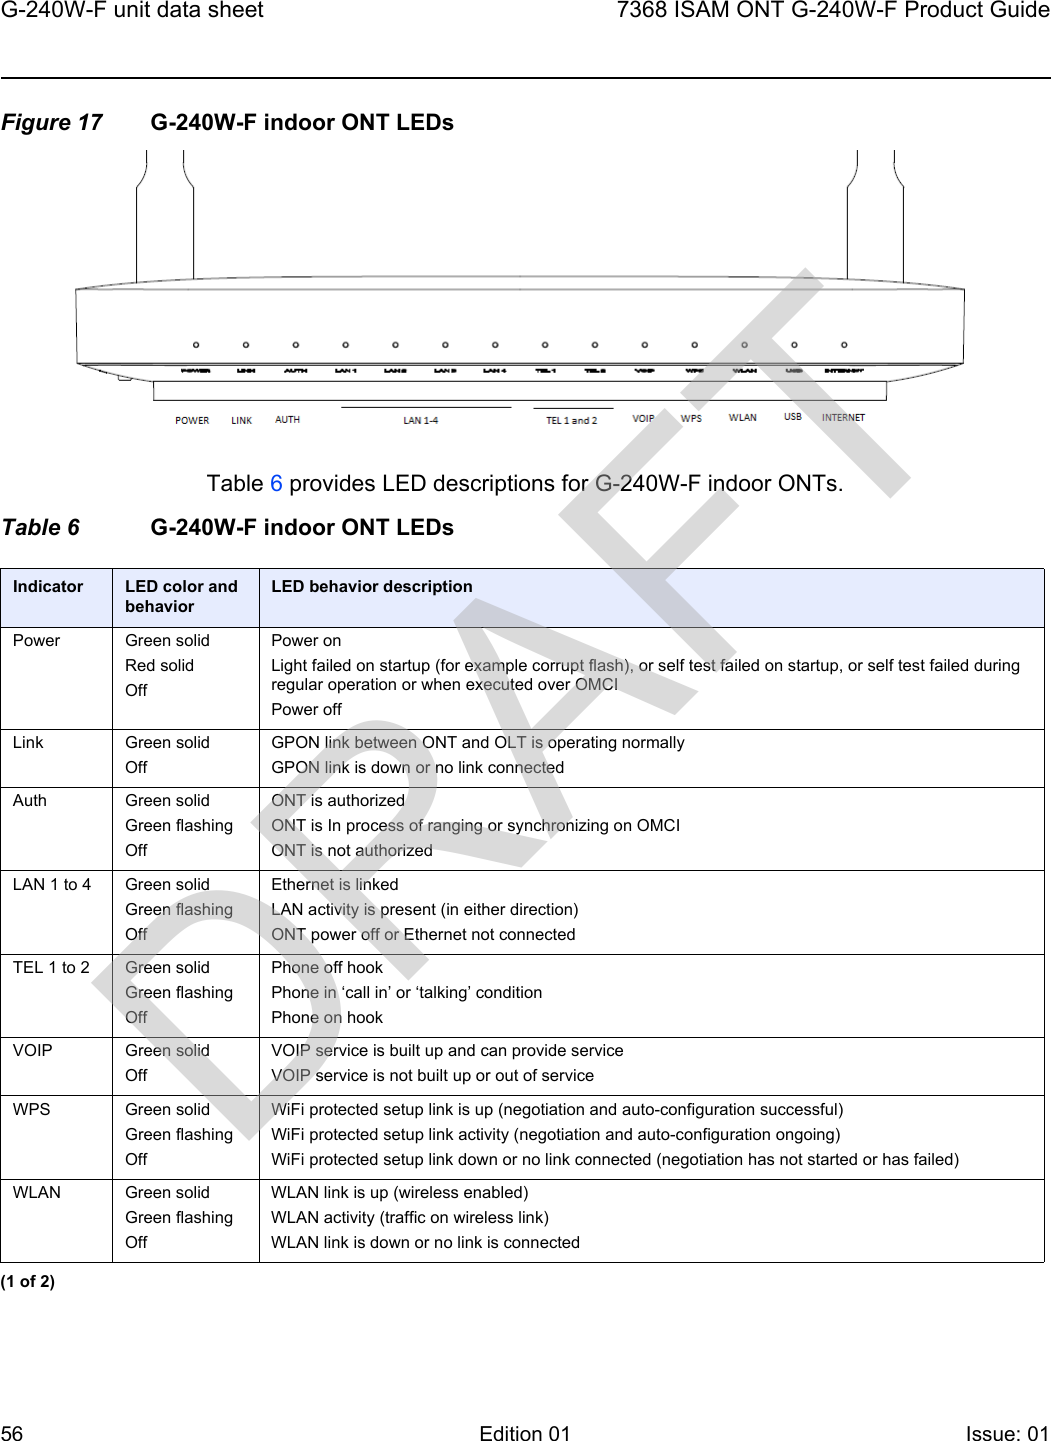 G-240W-F unit data sheet567368 ISAM ONT G-240W-F Product GuideEdition 01 Issue: 01 Figure 17 G-240W-F indoor ONT LEDsTable 6 provides LED descriptions for G-240W-F indoor ONTs.Table 6 G-240W-F indoor ONT LEDsIndicator LED color and behaviorLED behavior descriptionPower Green solidRed solidOffPower onLight failed on startup (for example corrupt flash), or self test failed on startup, or self test failed during regular operation or when executed over OMCIPower offLink Green solidOffGPON link between ONT and OLT is operating normallyGPON link is down or no link connectedAuth Green solidGreen flashingOffONT is authorizedONT is In process of ranging or synchronizing on OMCIONT is not authorizedLAN 1 to 4 Green solidGreen flashingOffEthernet is linkedLAN activity is present (in either direction)ONT power off or Ethernet not connectedTEL 1 to 2 Green solidGreen flashingOffPhone off hookPhone in ‘call in’ or ‘talking’ conditionPhone on hookVOIP Green solidOffVOIP service is built up and can provide serviceVOIP service is not built up or out of serviceWPS Green solidGreen flashingOffWiFi protected setup link is up (negotiation and auto-configuration successful)WiFi protected setup link activity (negotiation and auto-configuration ongoing)WiFi protected setup link down or no link connected (negotiation has not started or has failed)WLAN Green solidGreen flashingOffWLAN link is up (wireless enabled)WLAN activity (traffic on wireless link)WLAN link is down or no link is connected(1 of 2)DRAFT